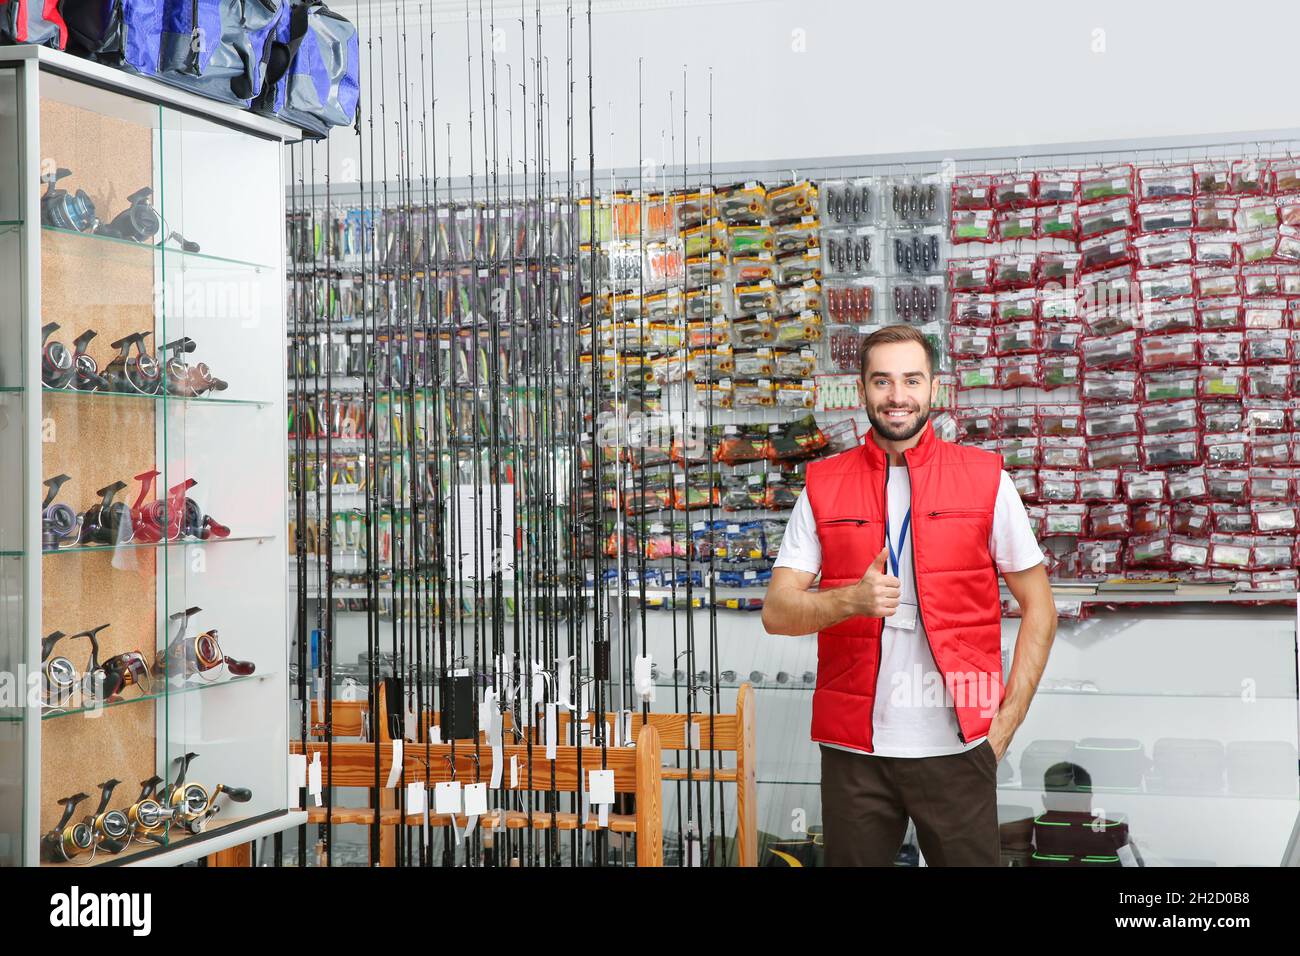 https://c8.alamy.com/comp/2H2D0B8/salesman-standing-near-showcase-with-fishing-equipment-in-sports-shop-space-for-text-2H2D0B8.jpg